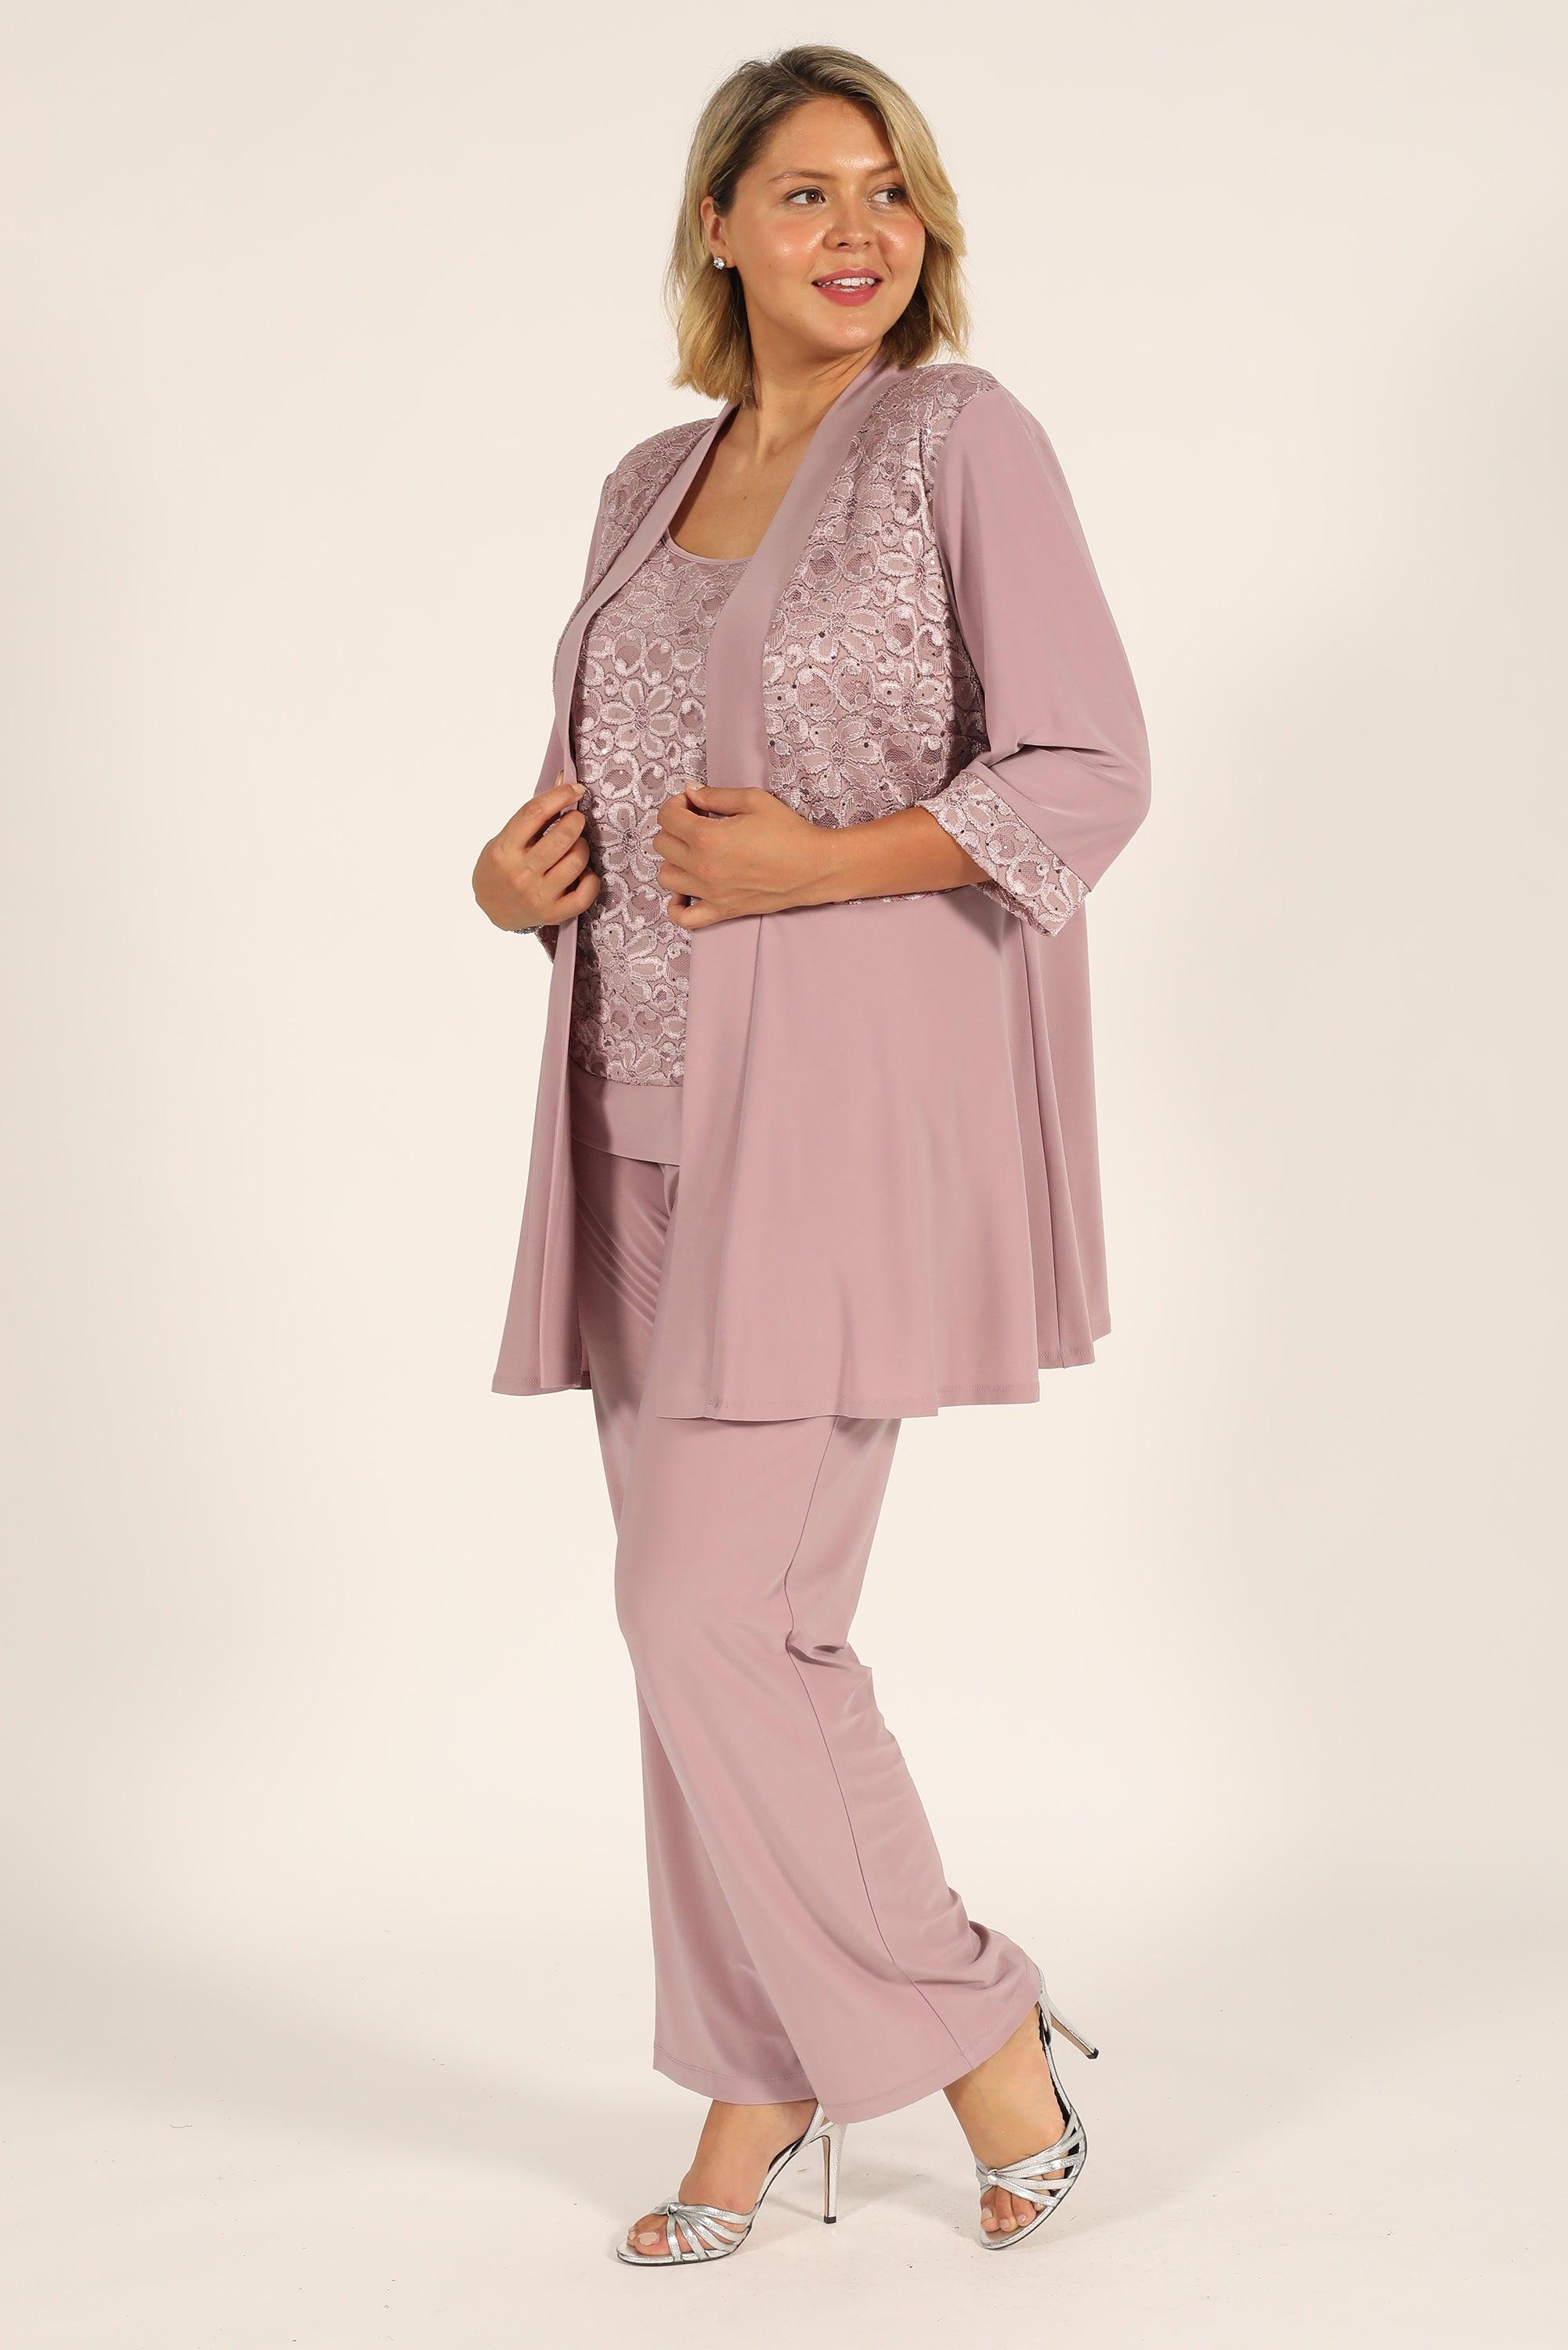 Formal Pant Suit for Womens – After 5 Formal